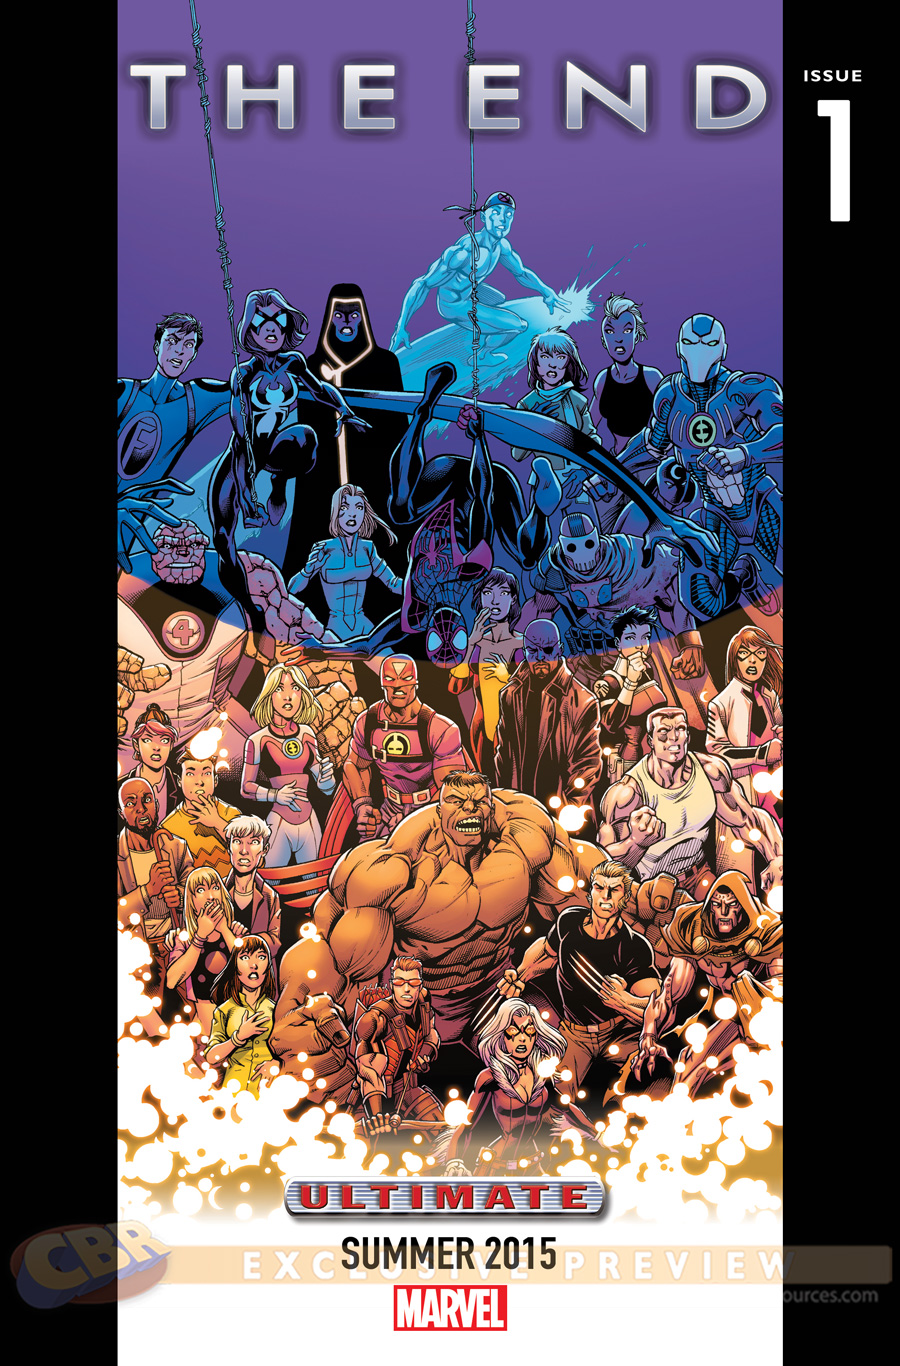 All-New-Avengers-Now-Secret-Wars-Summer-2015-Marvel-Then-The-End-of-the-Ultimate-Universe.jpg